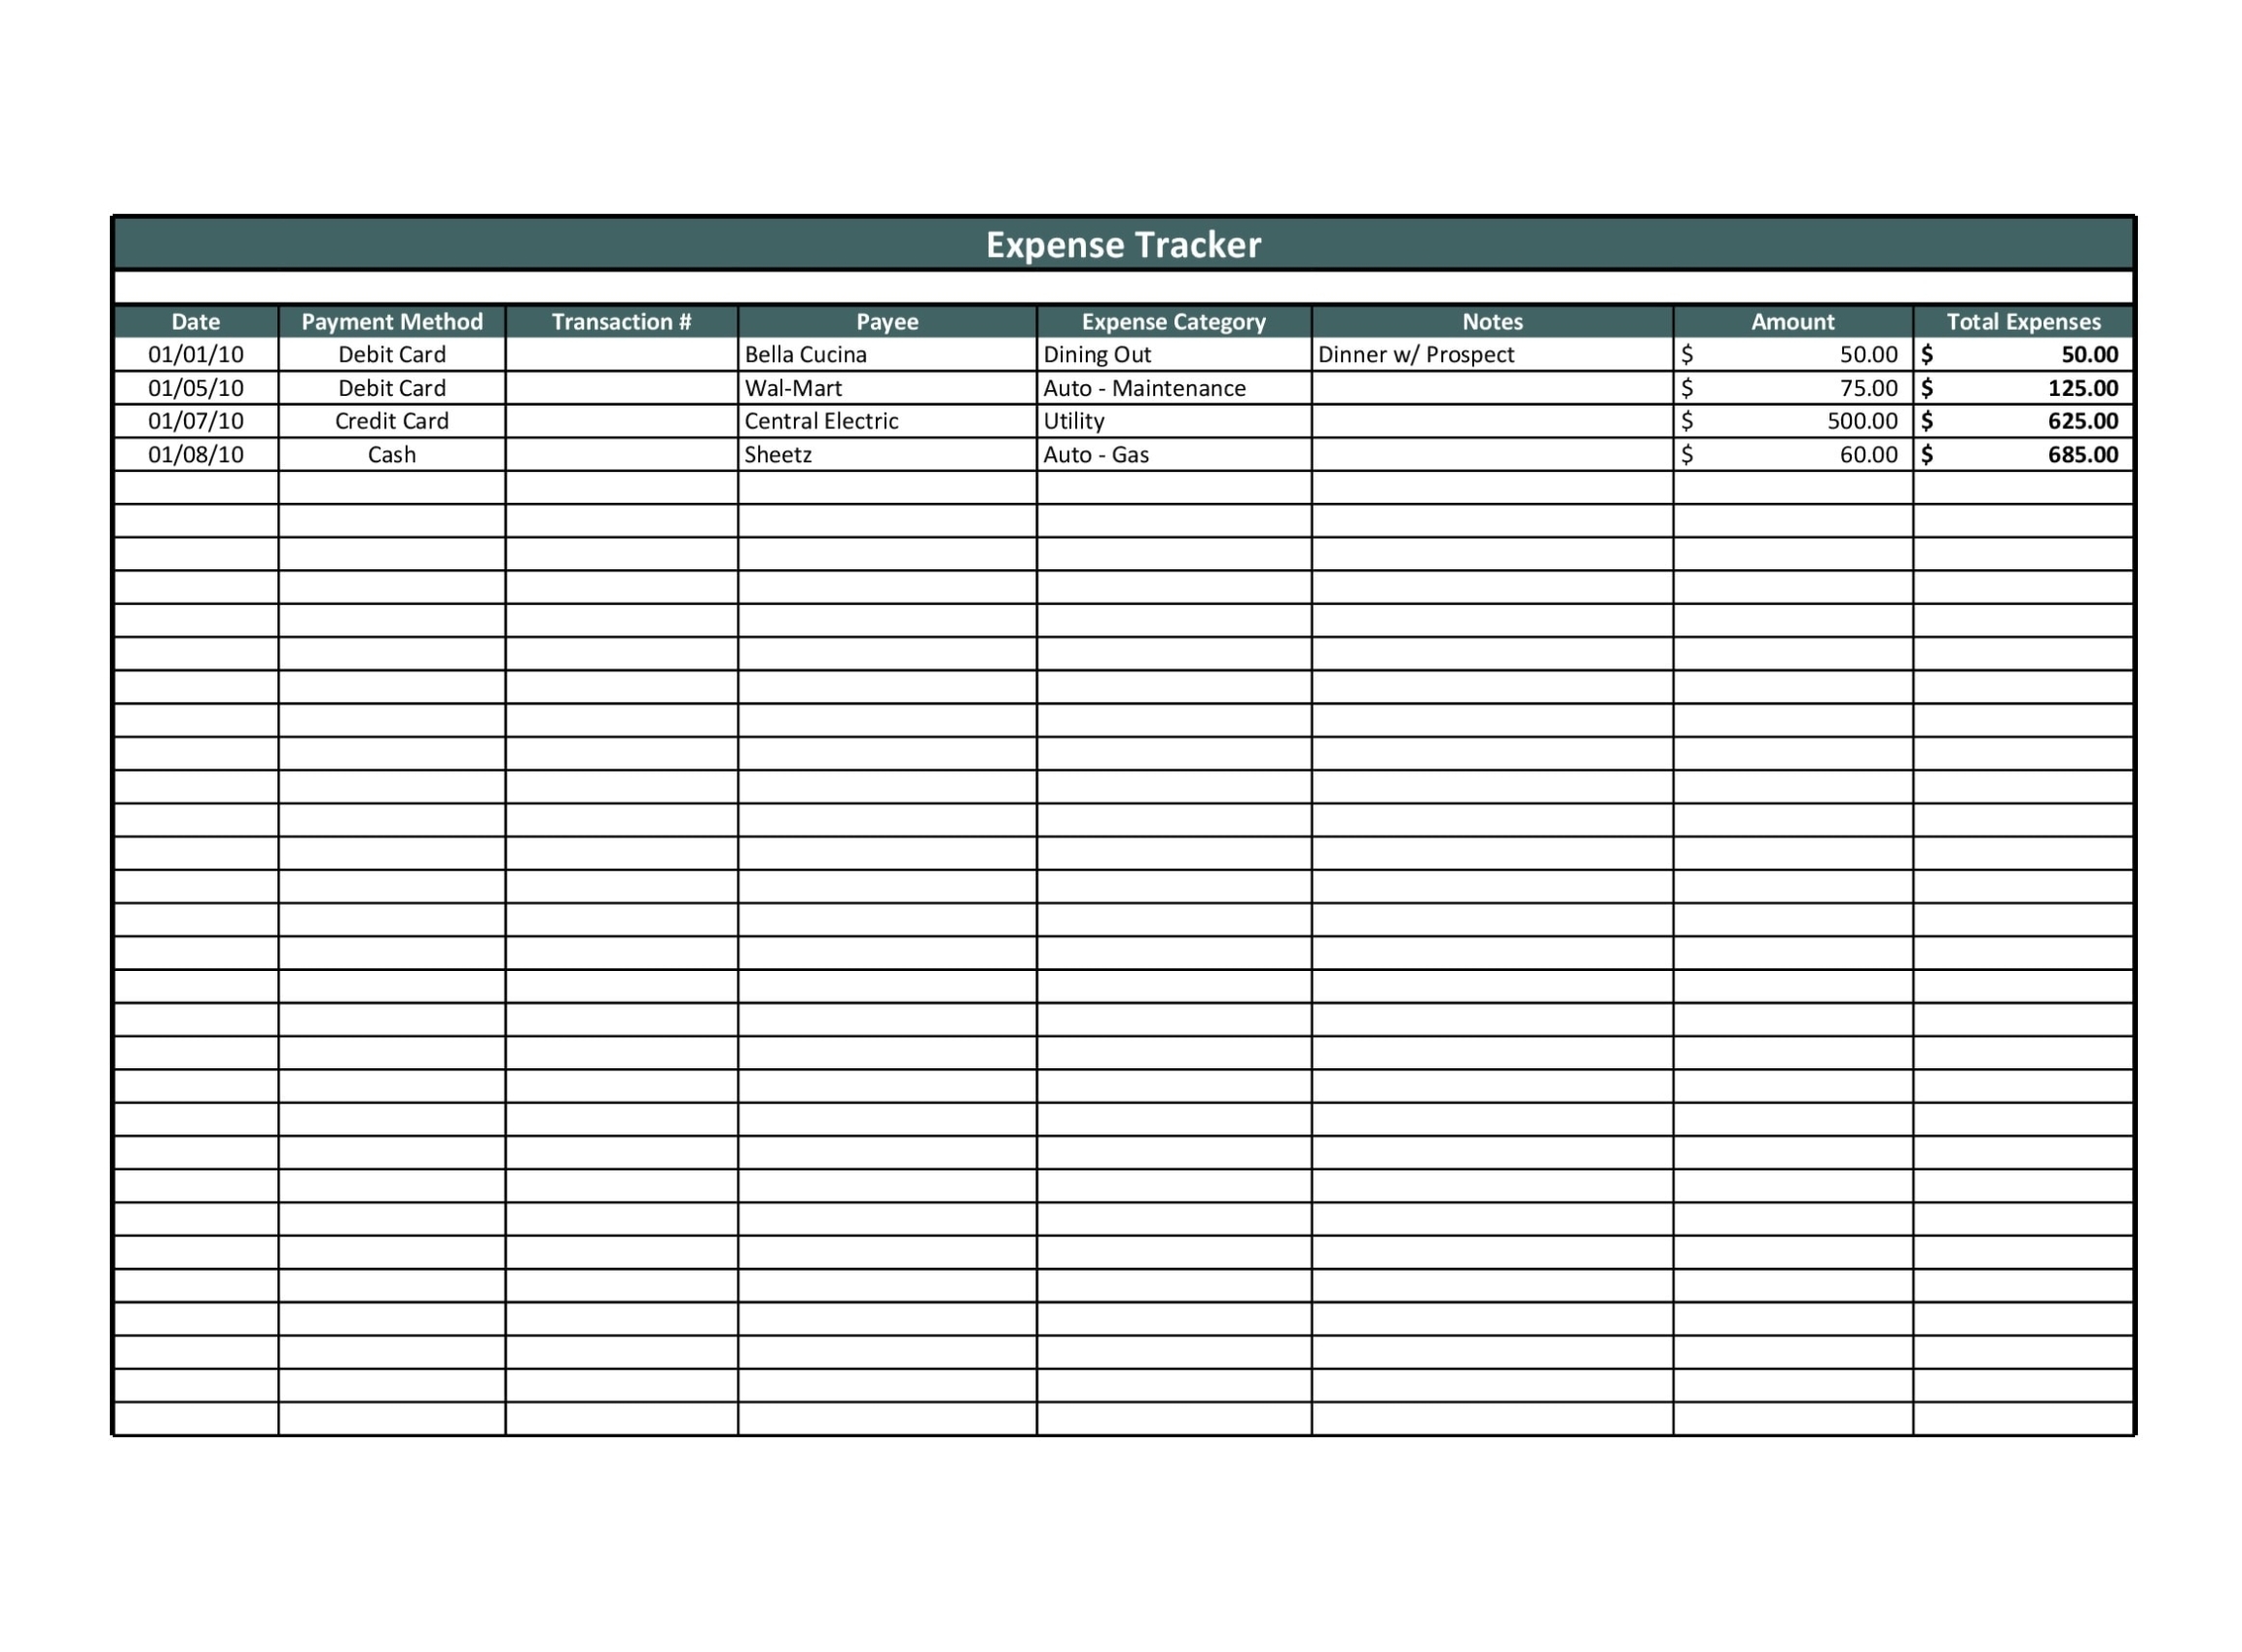 Free Excel Spreadsheet Templates For Small Business with regard to Free Excel Spreadsheet Templates For Small Business